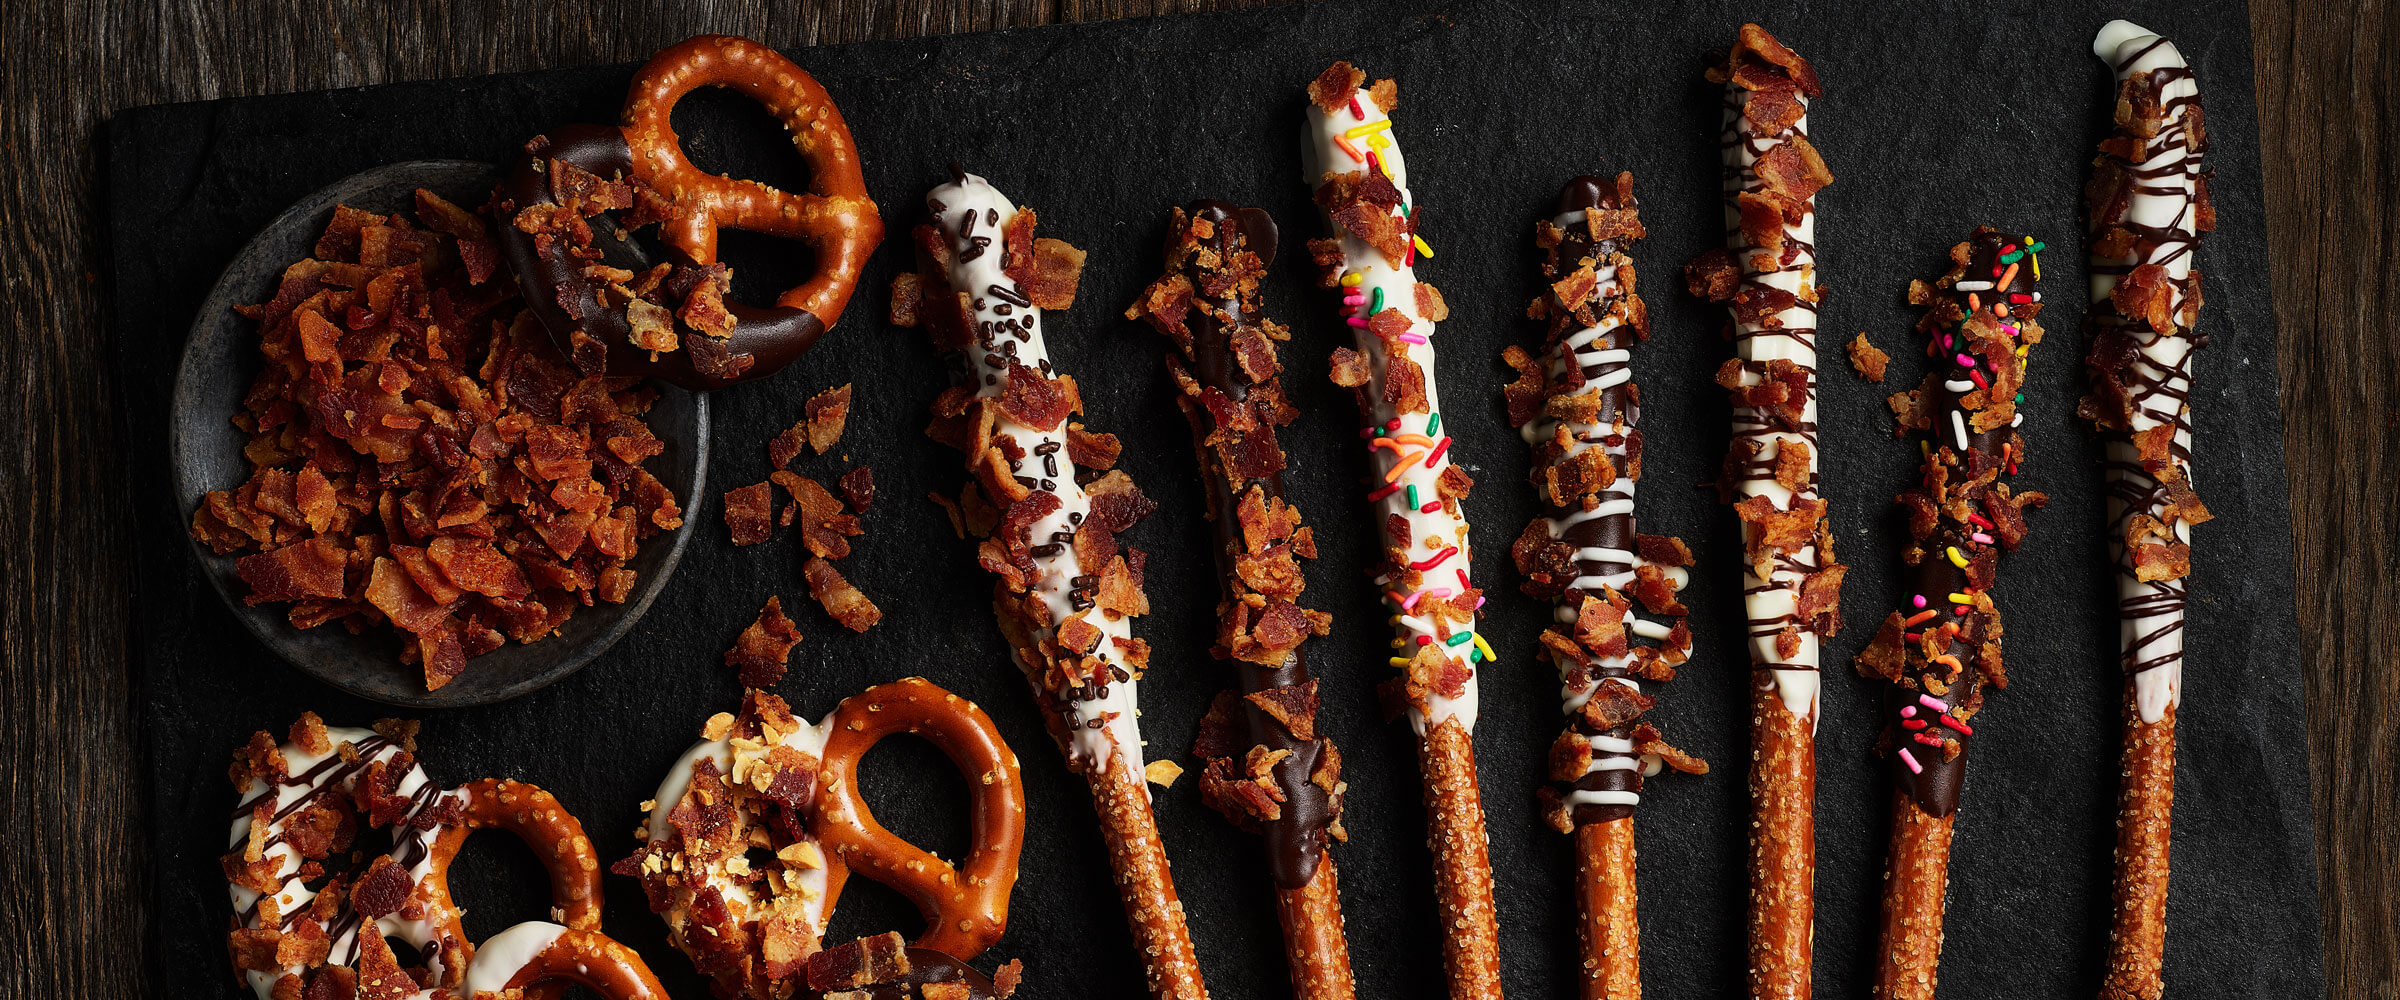 Dipped Pretzels with Bacon, frosting and chocolate on black board